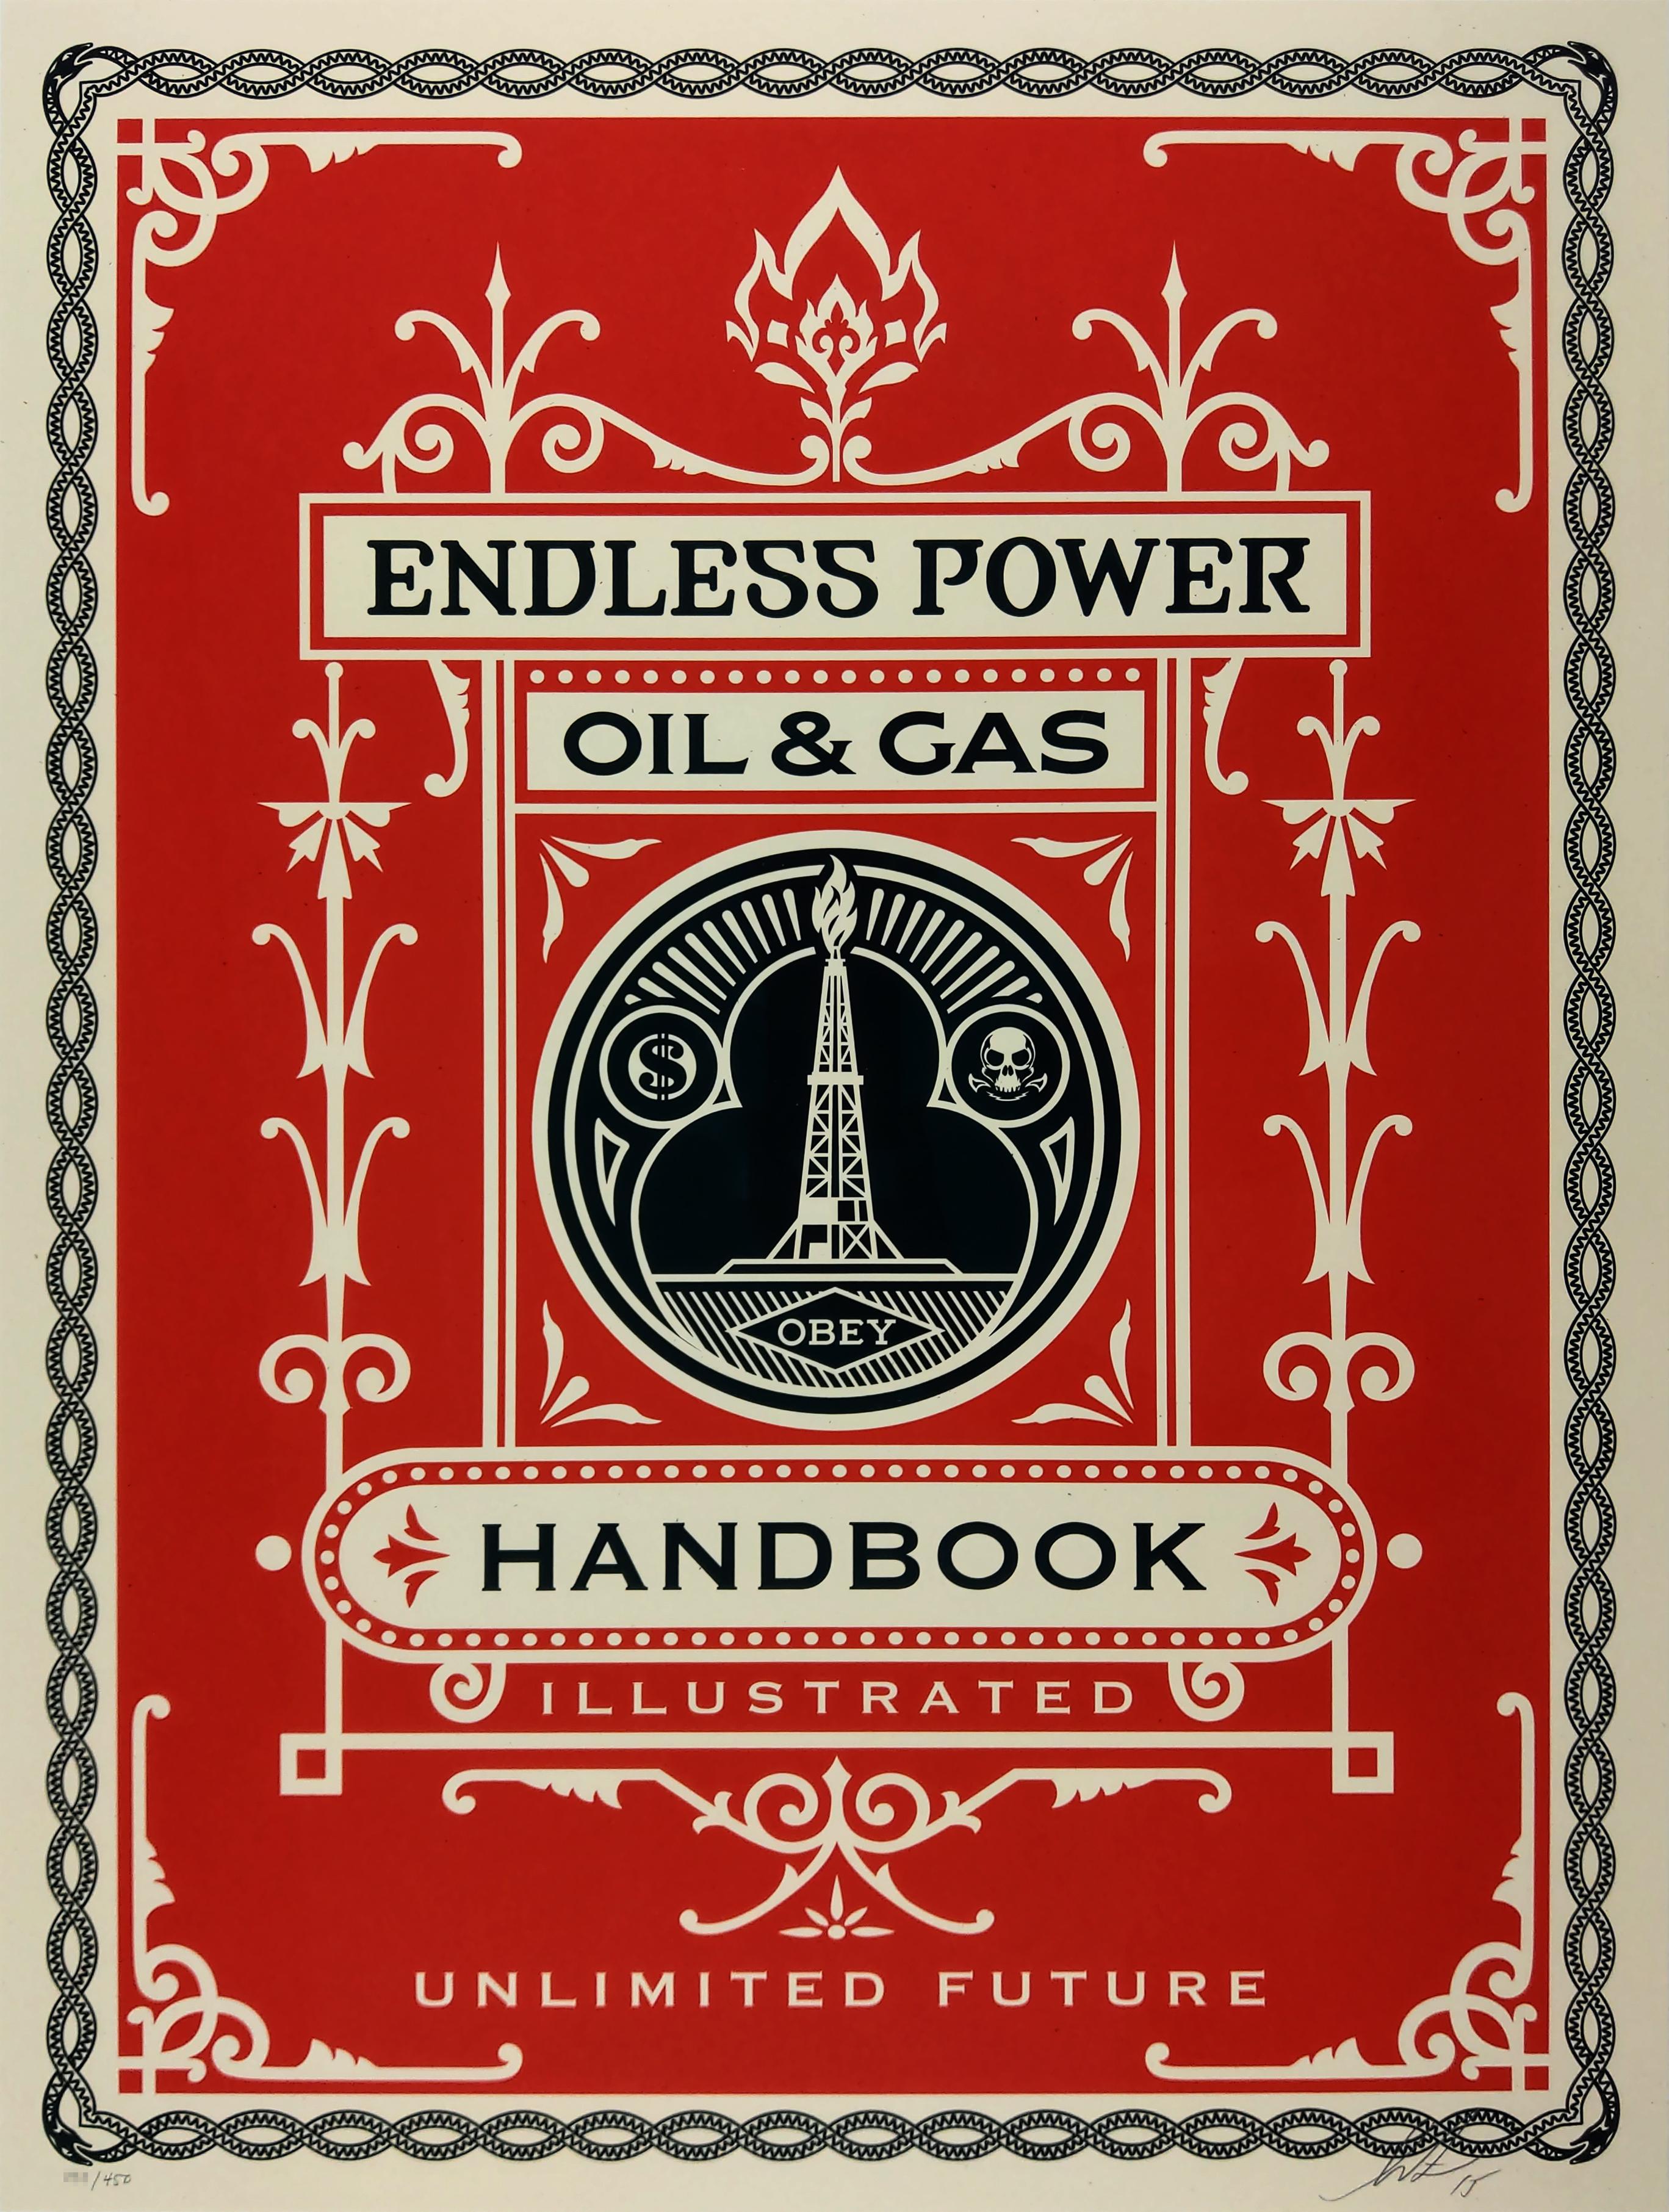 Endless Power Handbook - Shepard Fairey Obey Contemporary Print. Screen print on cream speckle tone paper. Signed and numbered edition of 450. 

Shepard Fairey is a major influencer in the street art movement along side Banksy, Mr. Brainwash, and